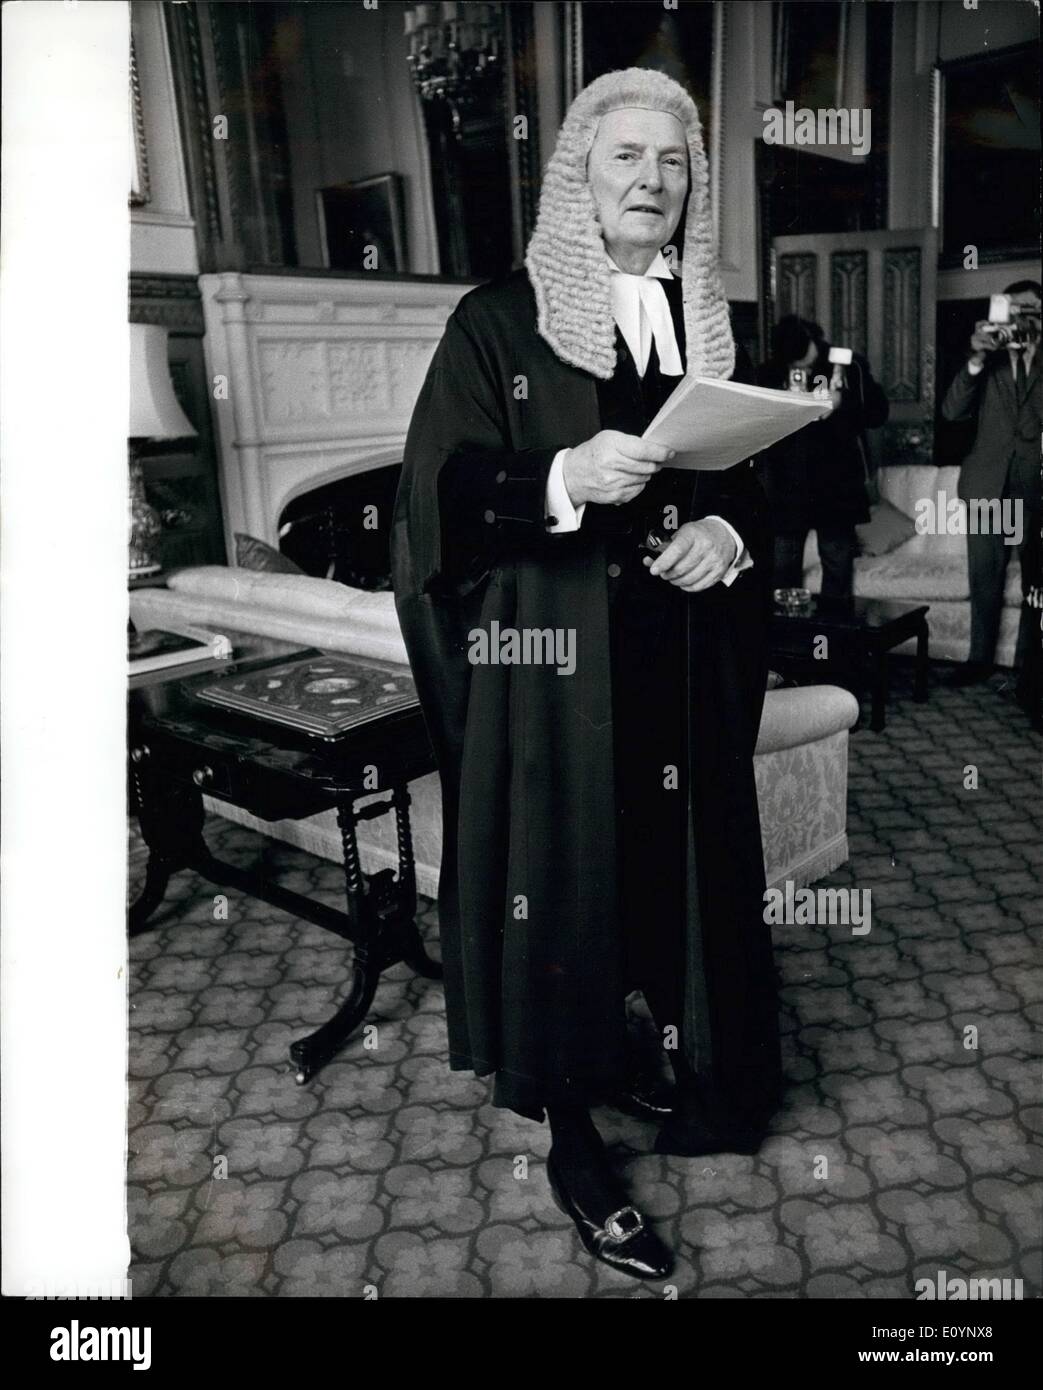 Jan. 01, 1971 - Mr. Selwyn Lloyd the new speaker of the house of commons in his Robes. Photo shows Mr. Selwyn Lloyd, who on Tuesday last was elected as the new Speaker of the House of commons, pictured in his robes in the library of the house of Commons yesterday. Stock Photo